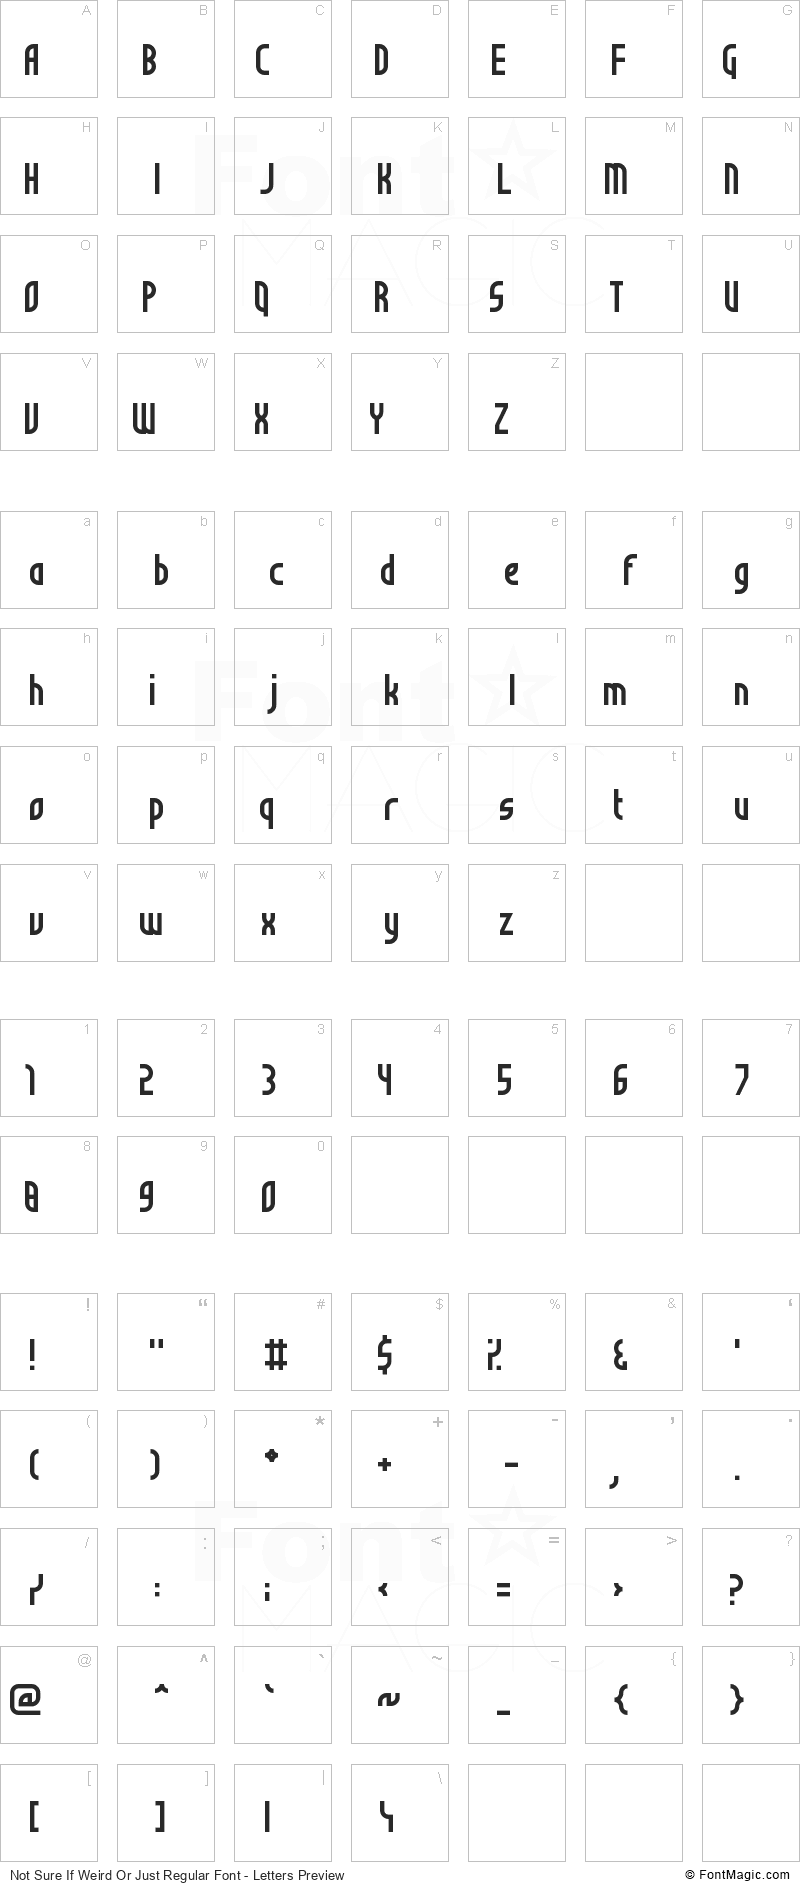 Not Sure If Weird Or Just Regular Font - All Latters Preview Chart